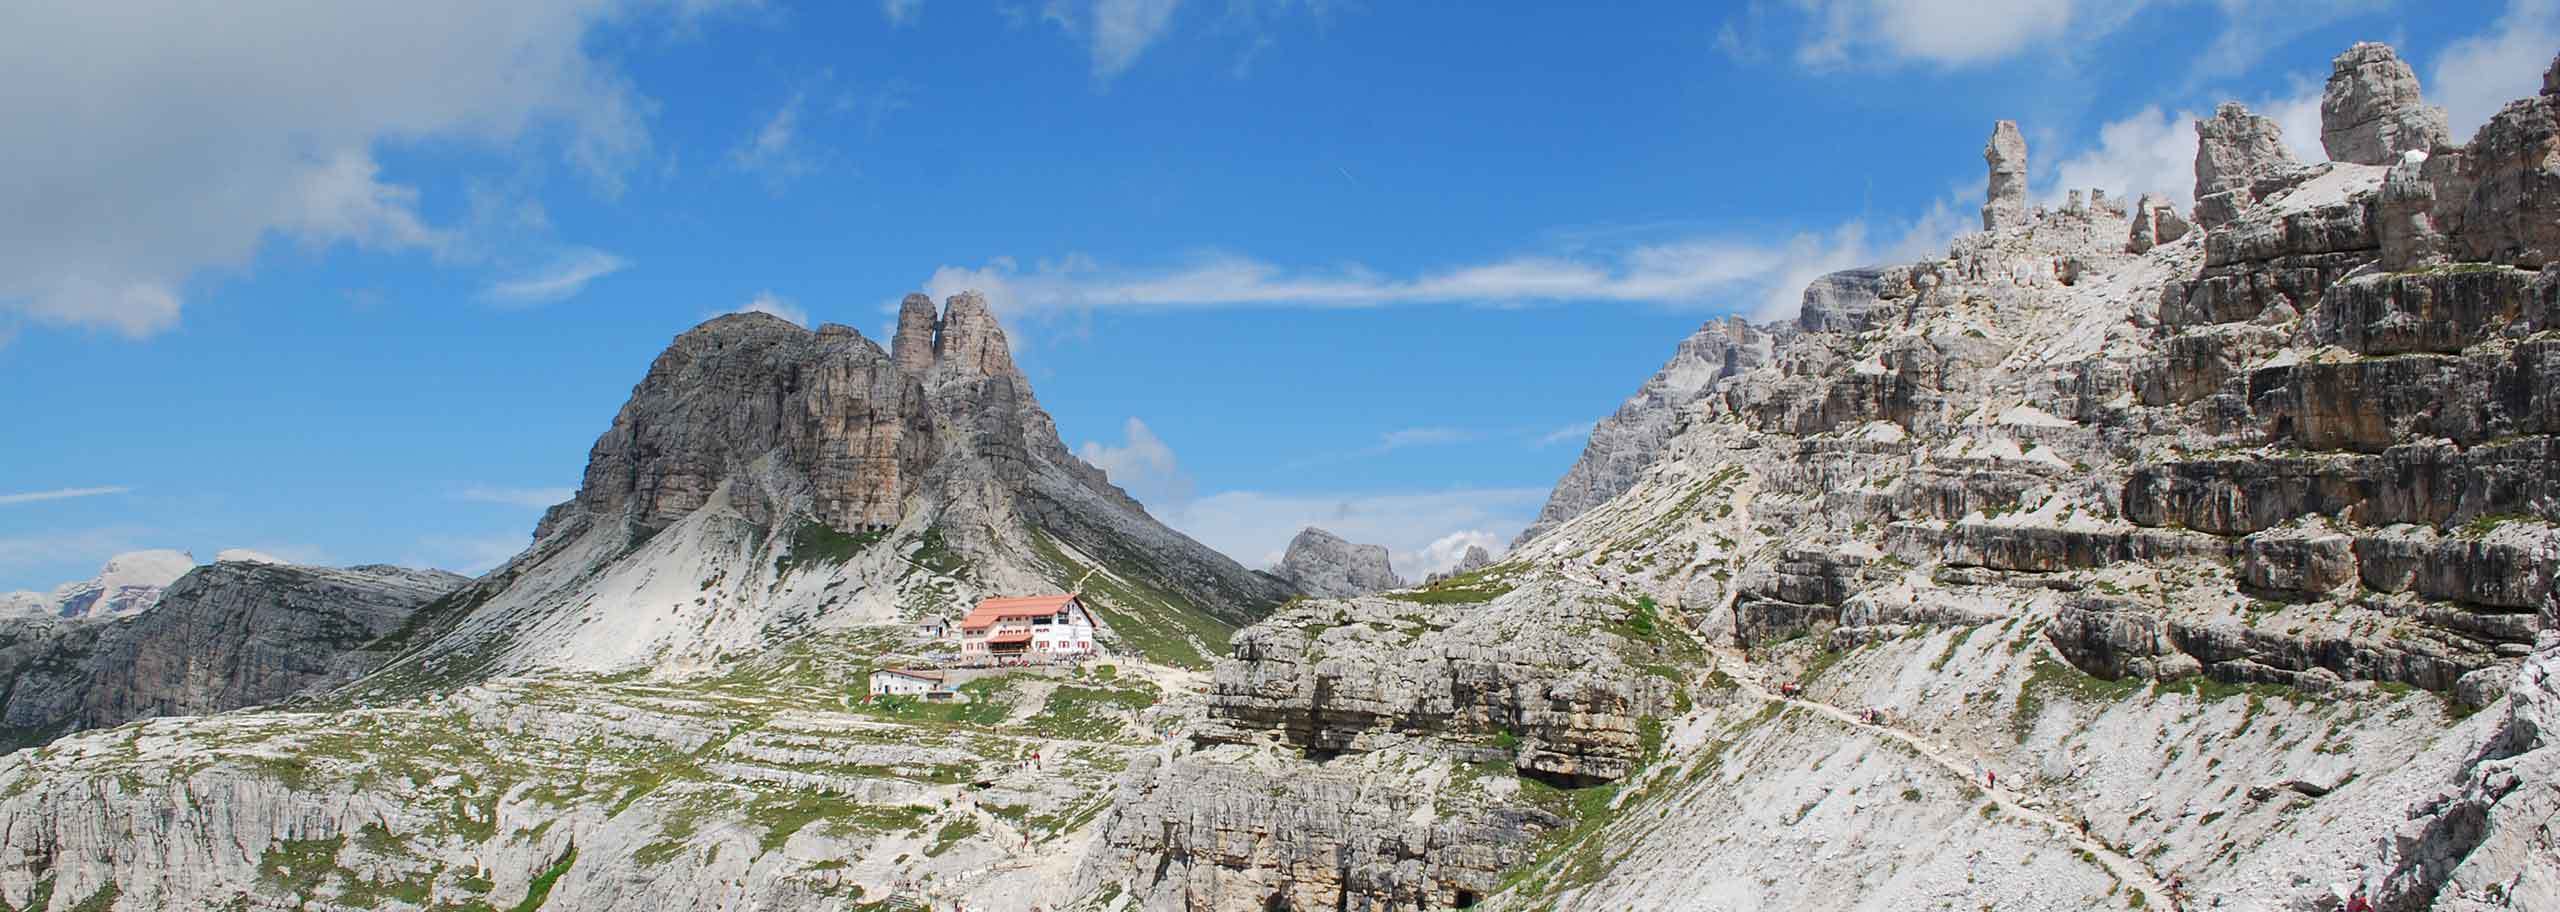 Hiking in Puster Valley, Trekking and Nature in South Tyrol